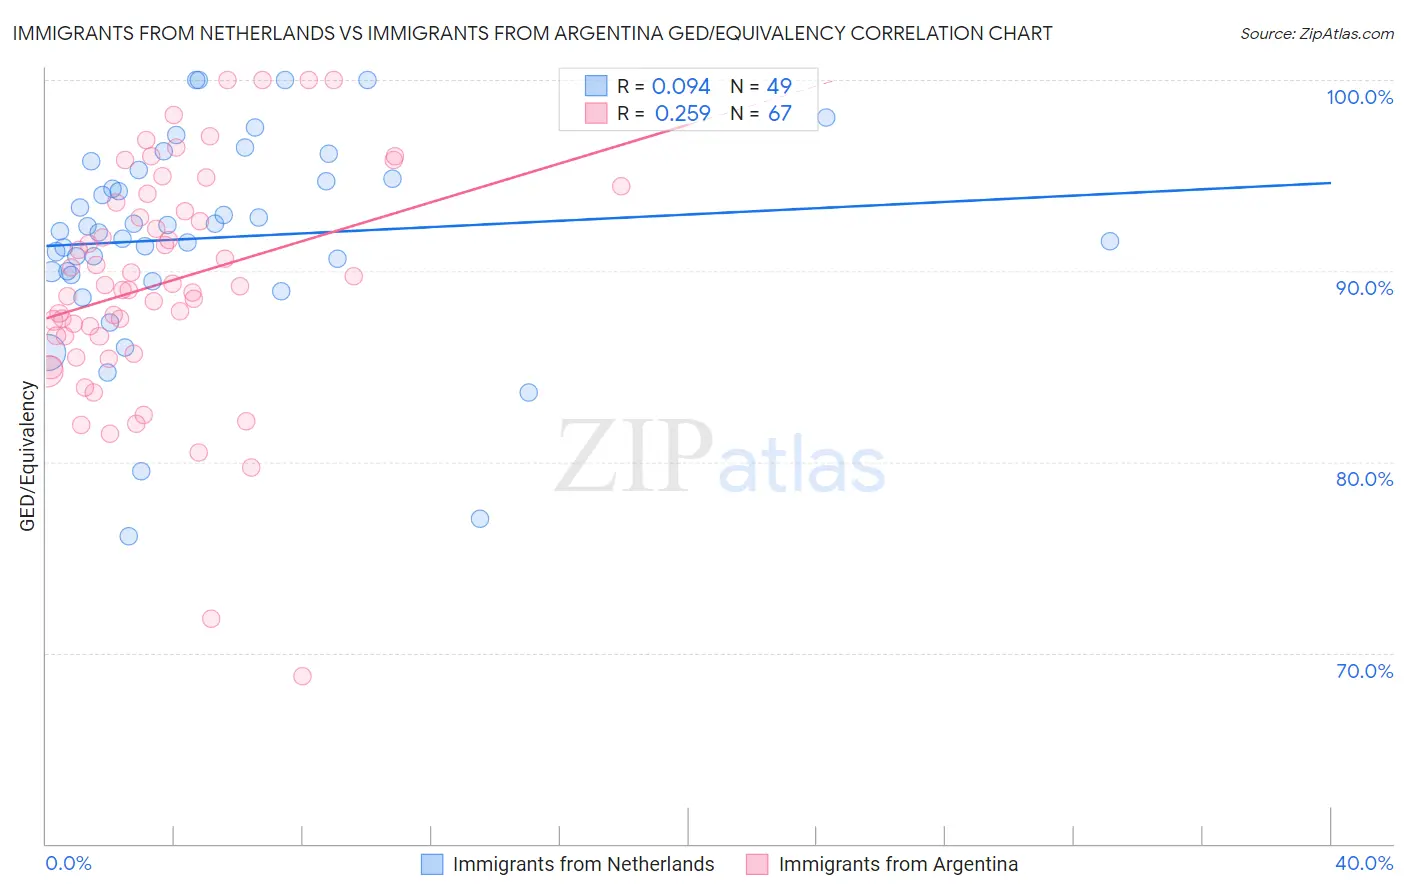 Immigrants from Netherlands vs Immigrants from Argentina GED/Equivalency